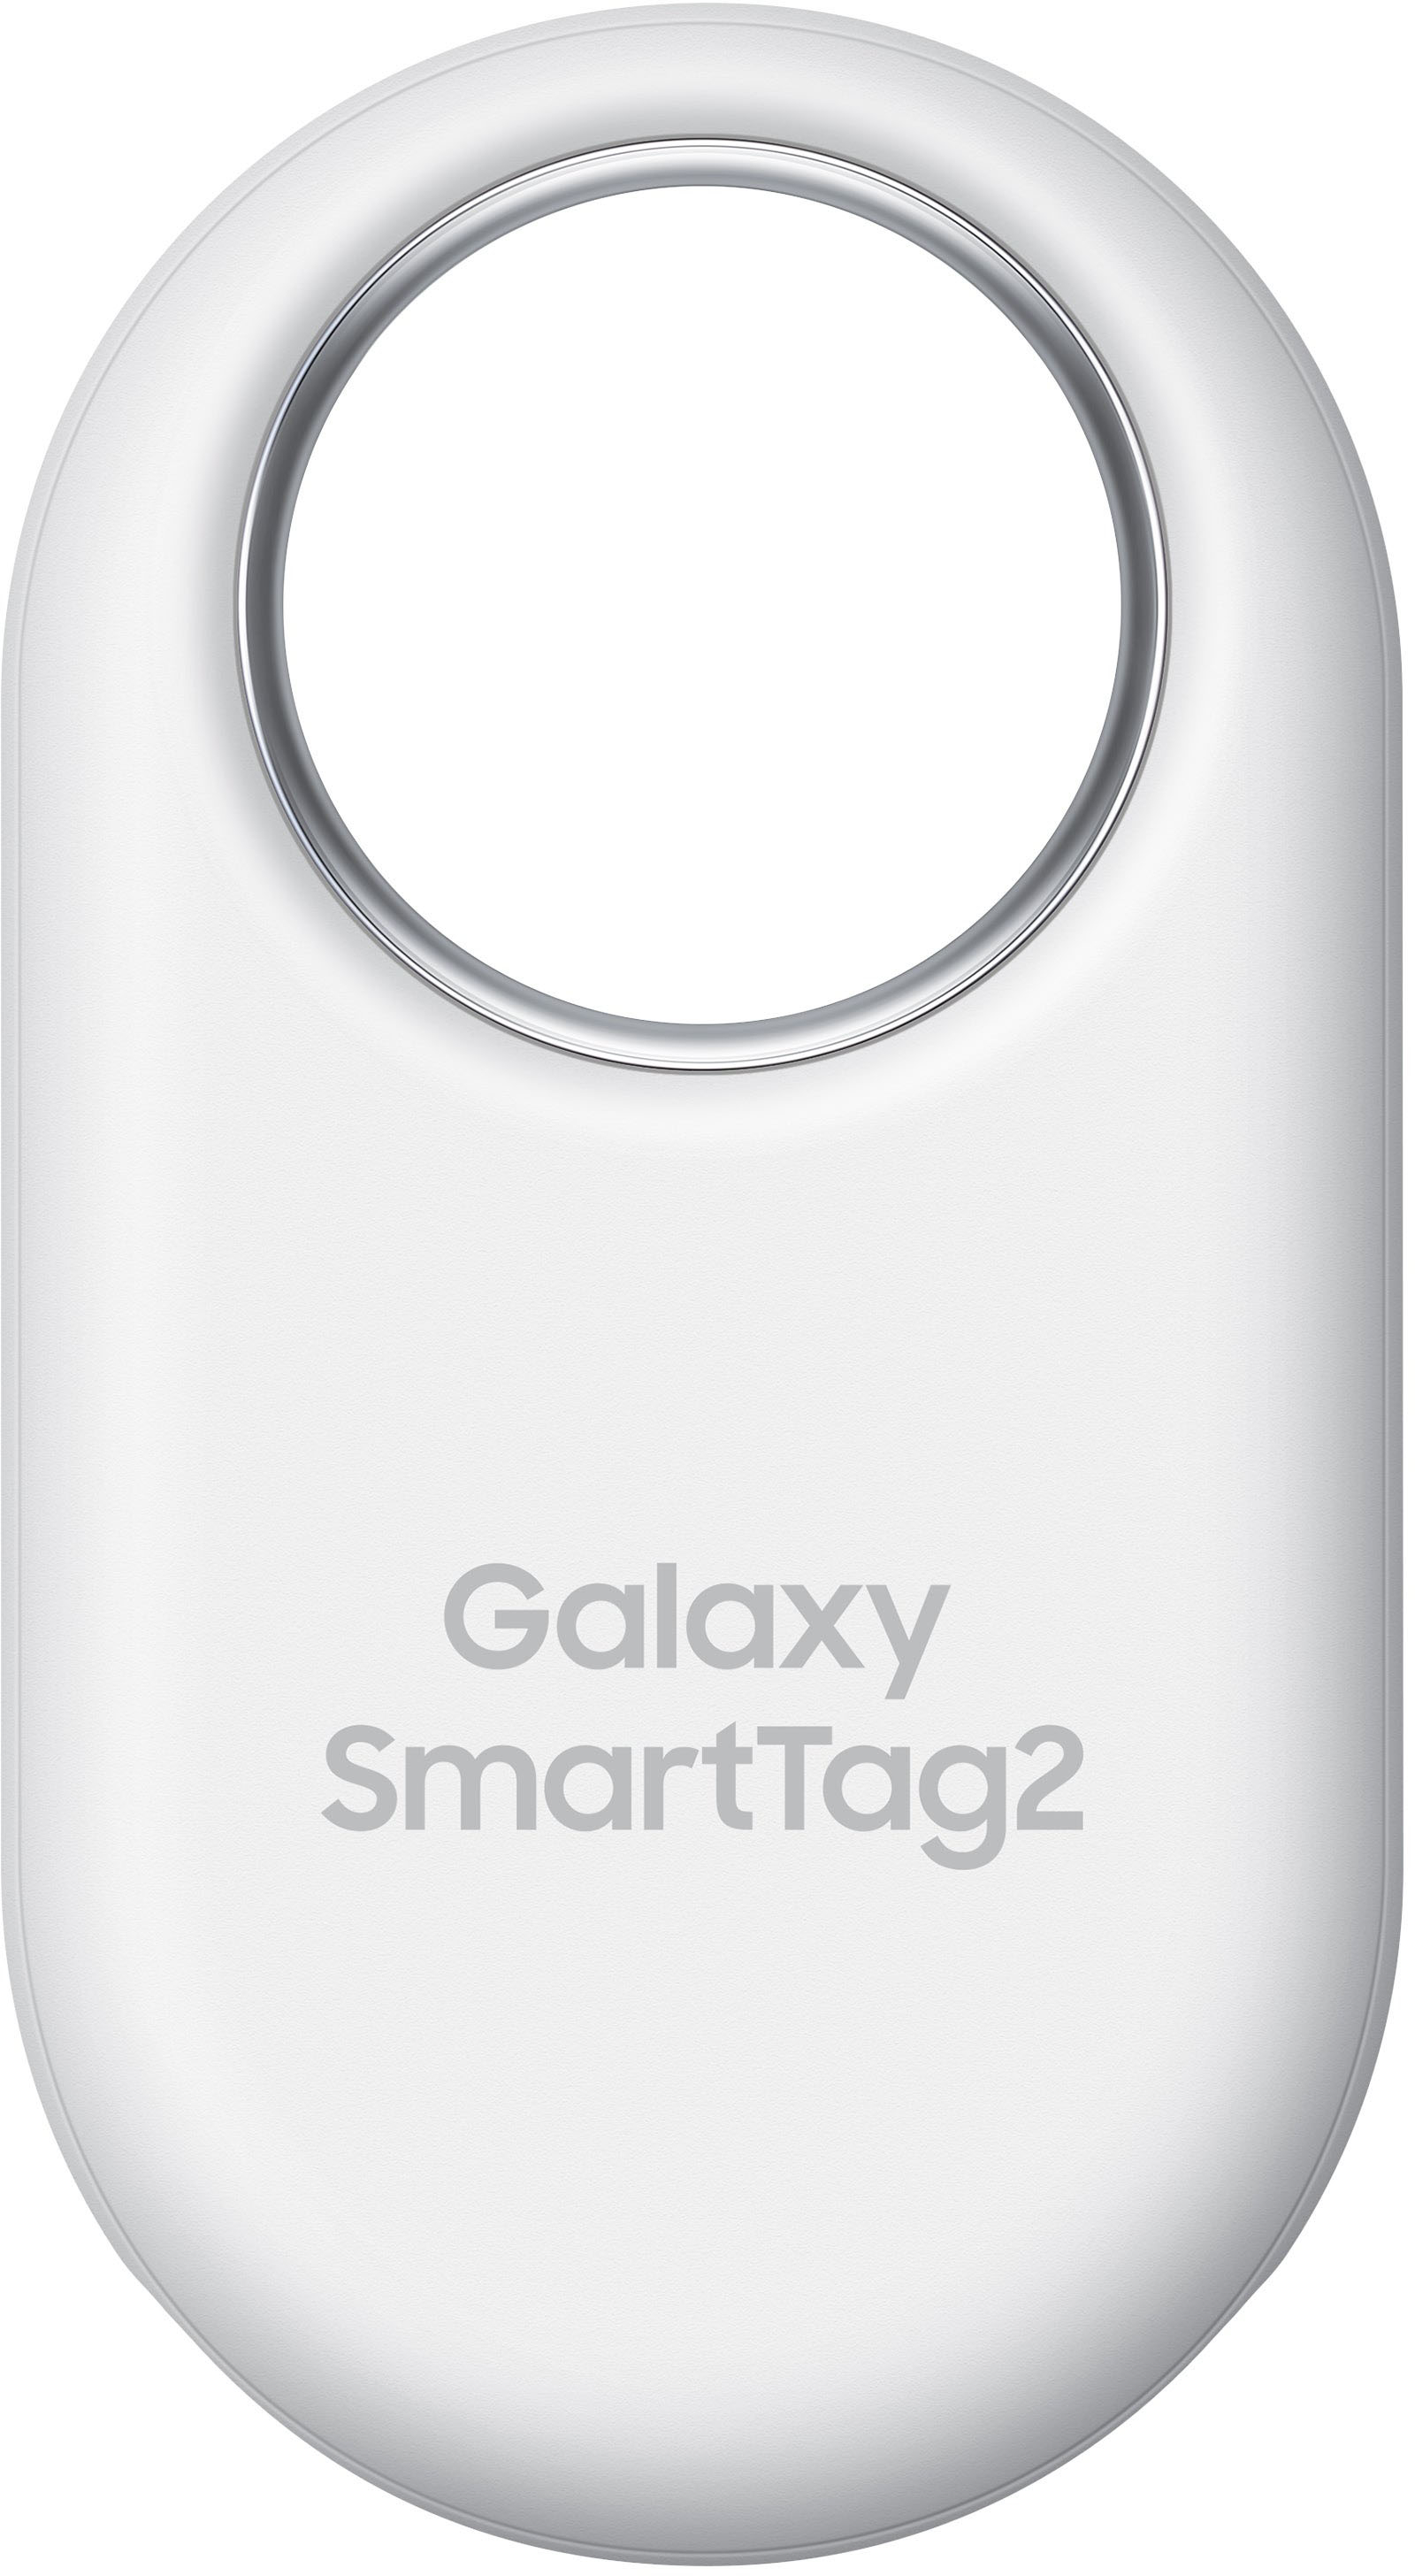 Samsung Galaxy SmartTag2 review - Android Authority